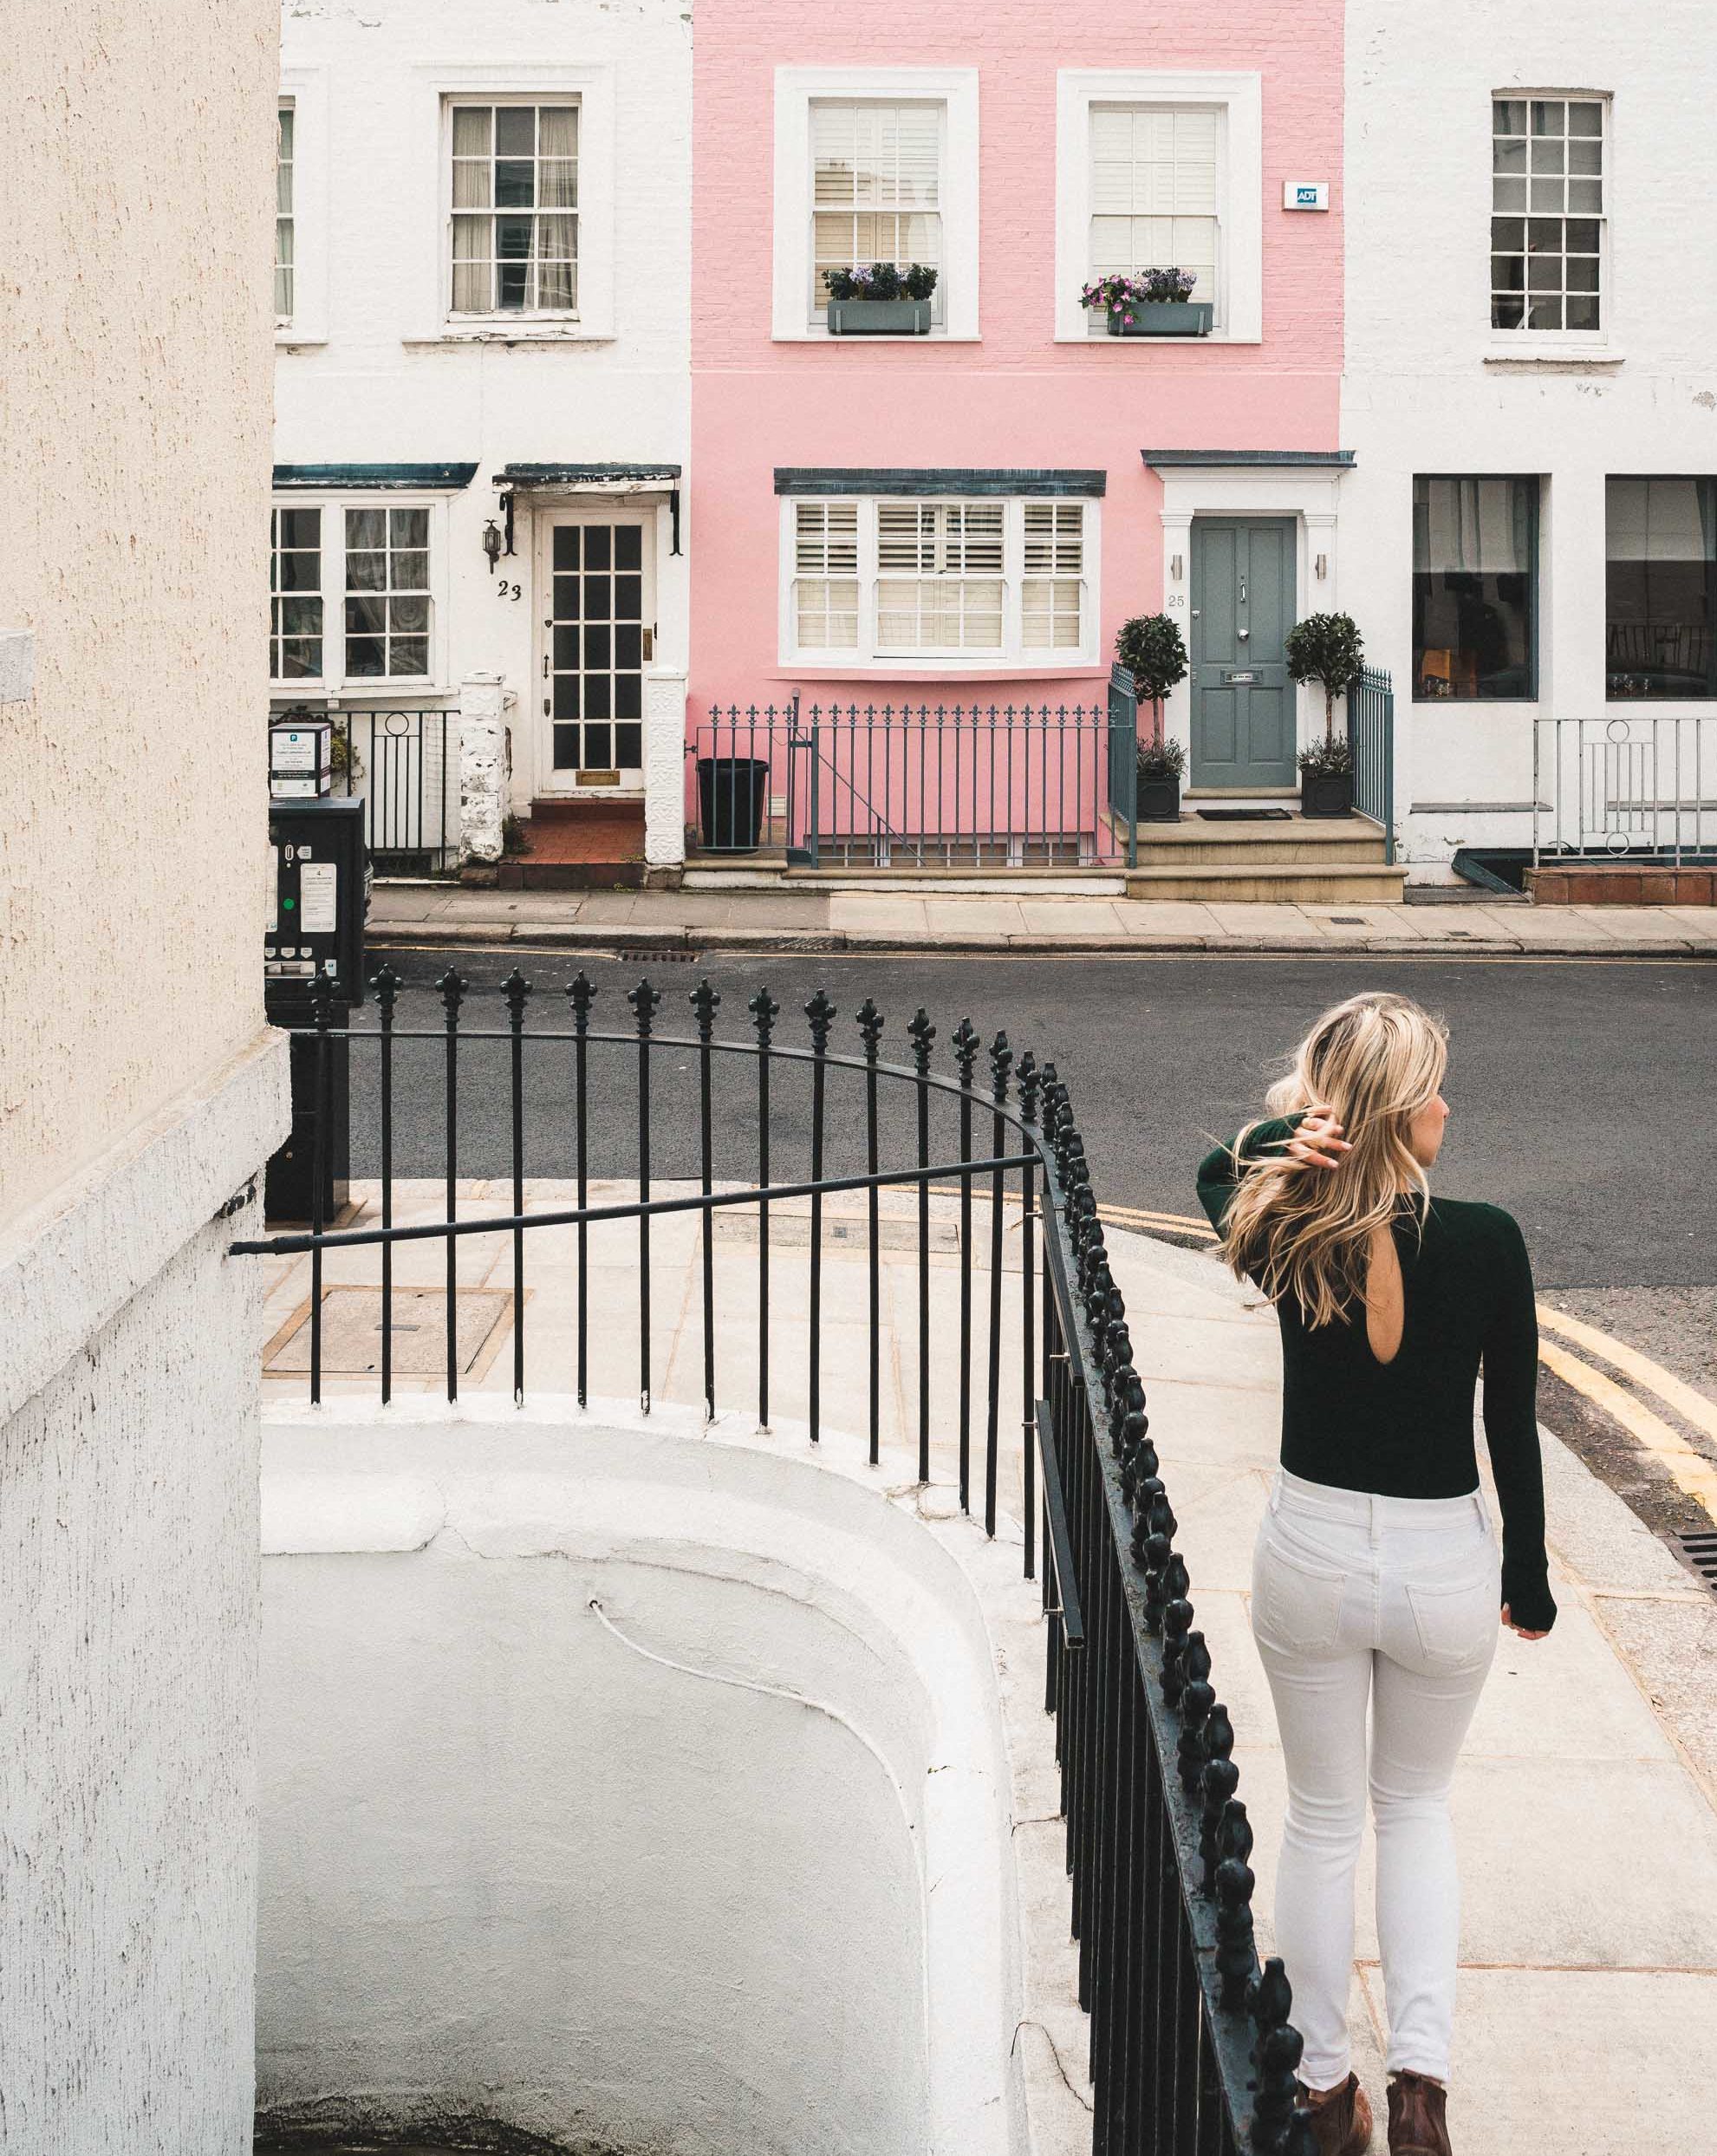 Notting hill pastel houses london england travel blogger Selena Taylor of Find Us Lost